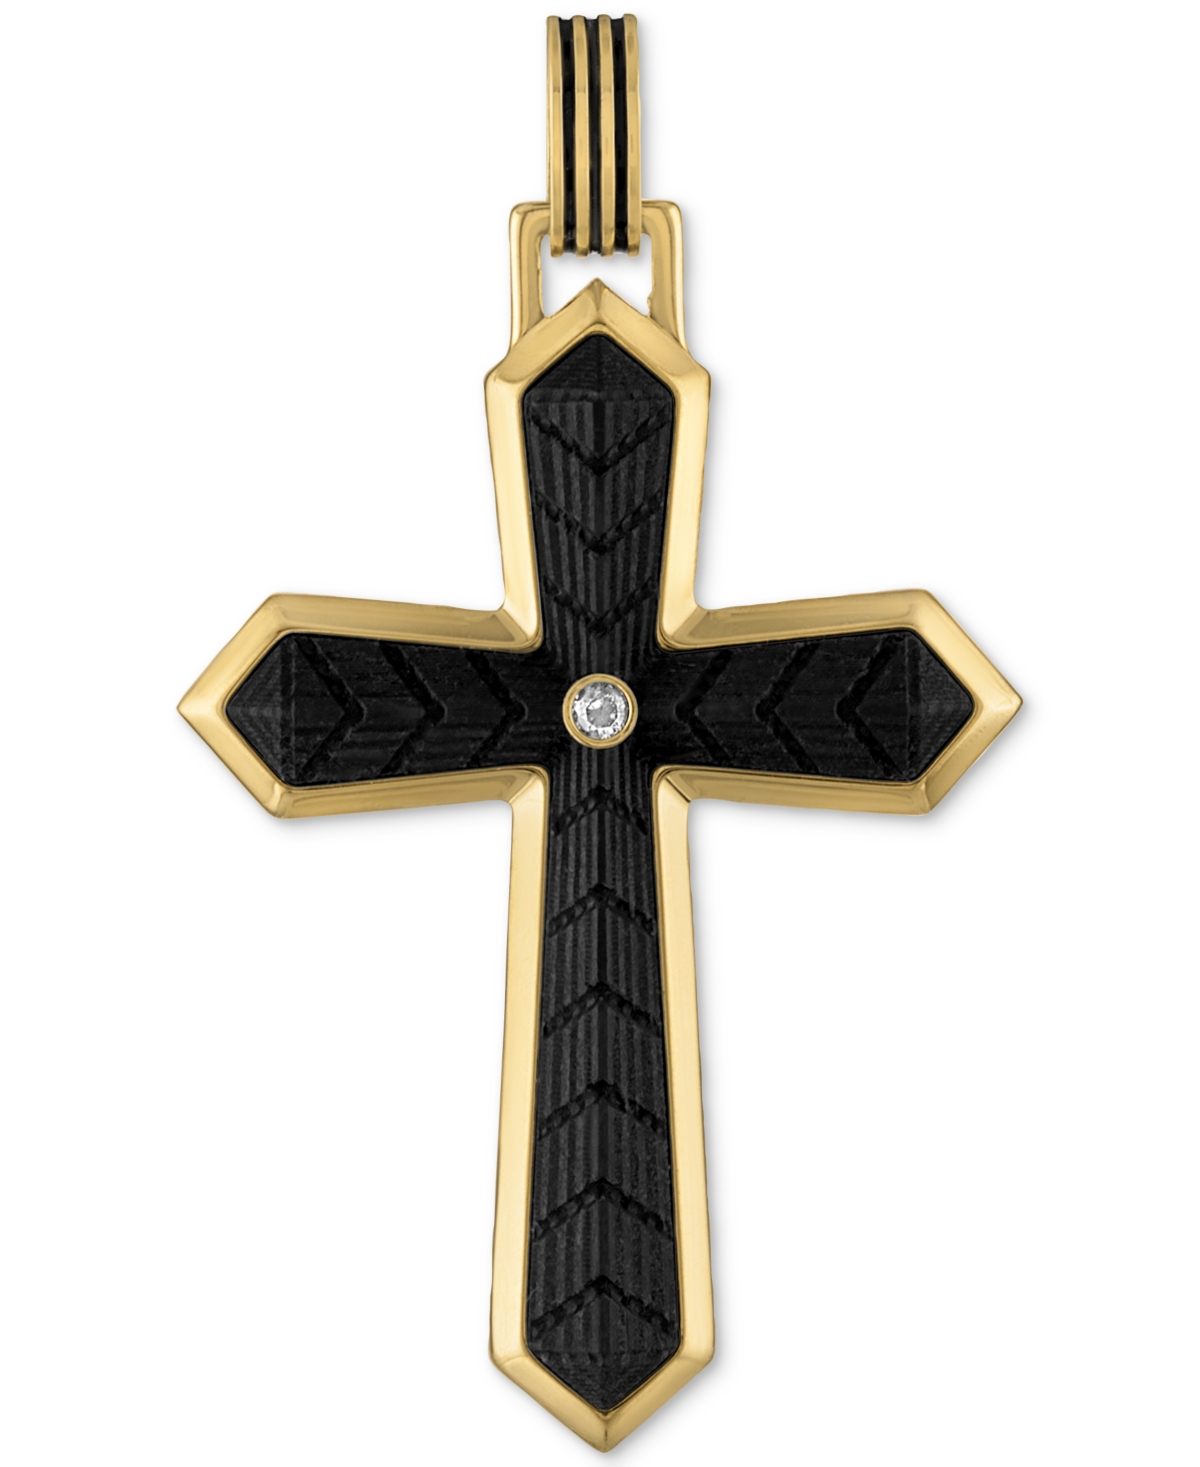 Esquire Men's Jewelry Cubic Zirconia Carbon Fiber Cross Pendant In 14k Gold-plated Sterling Silver, Created For Macy's In Gold Over Silver